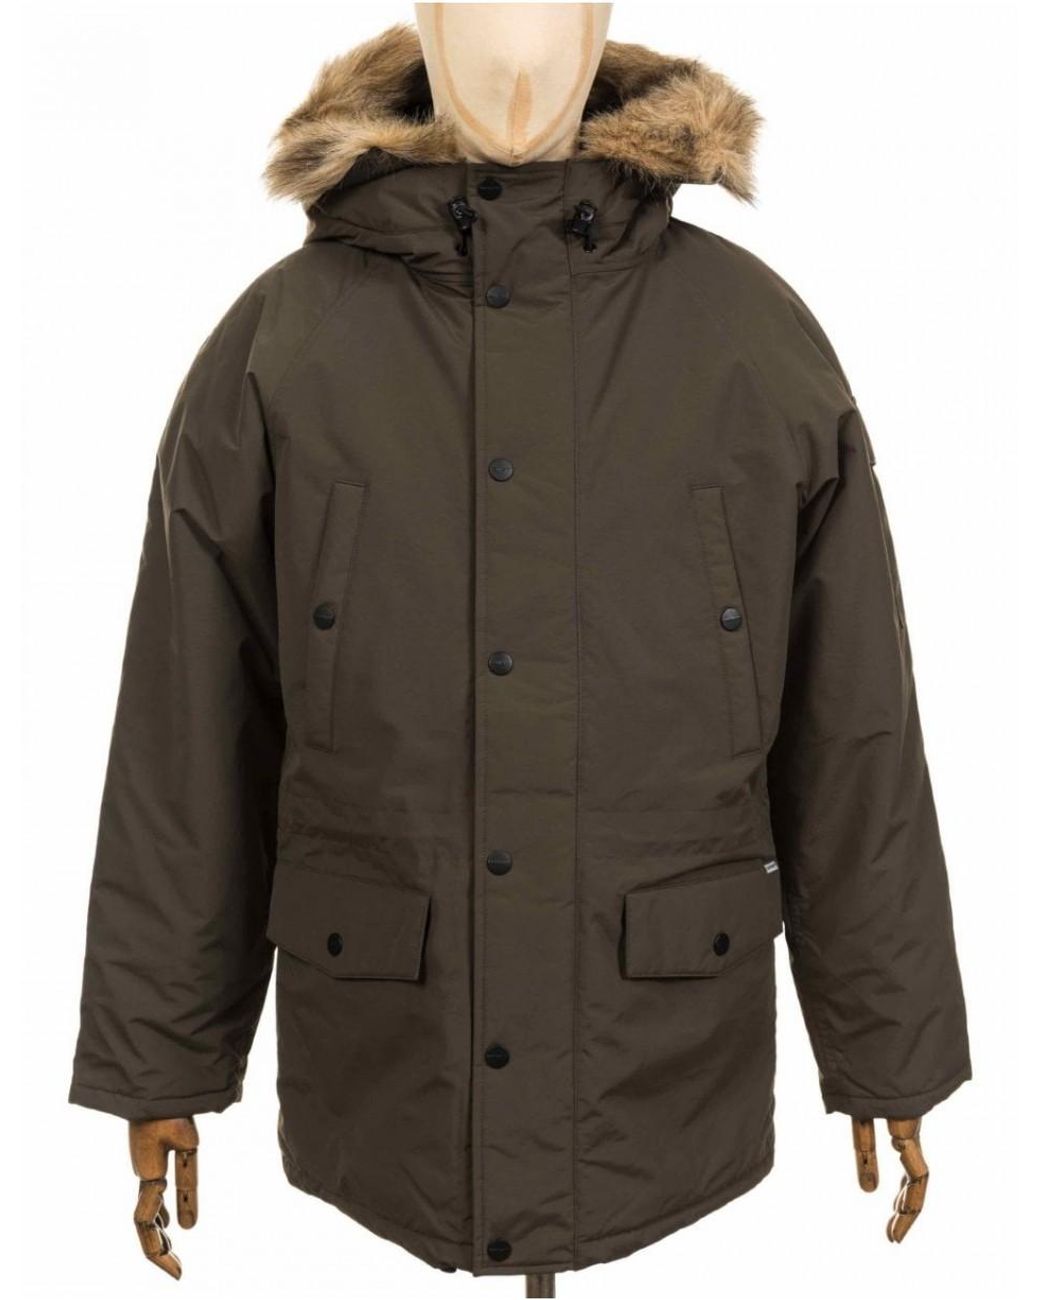 Carhartt Synthetic Wip Anchorage Parka Jacket in Green for Men - Save ...